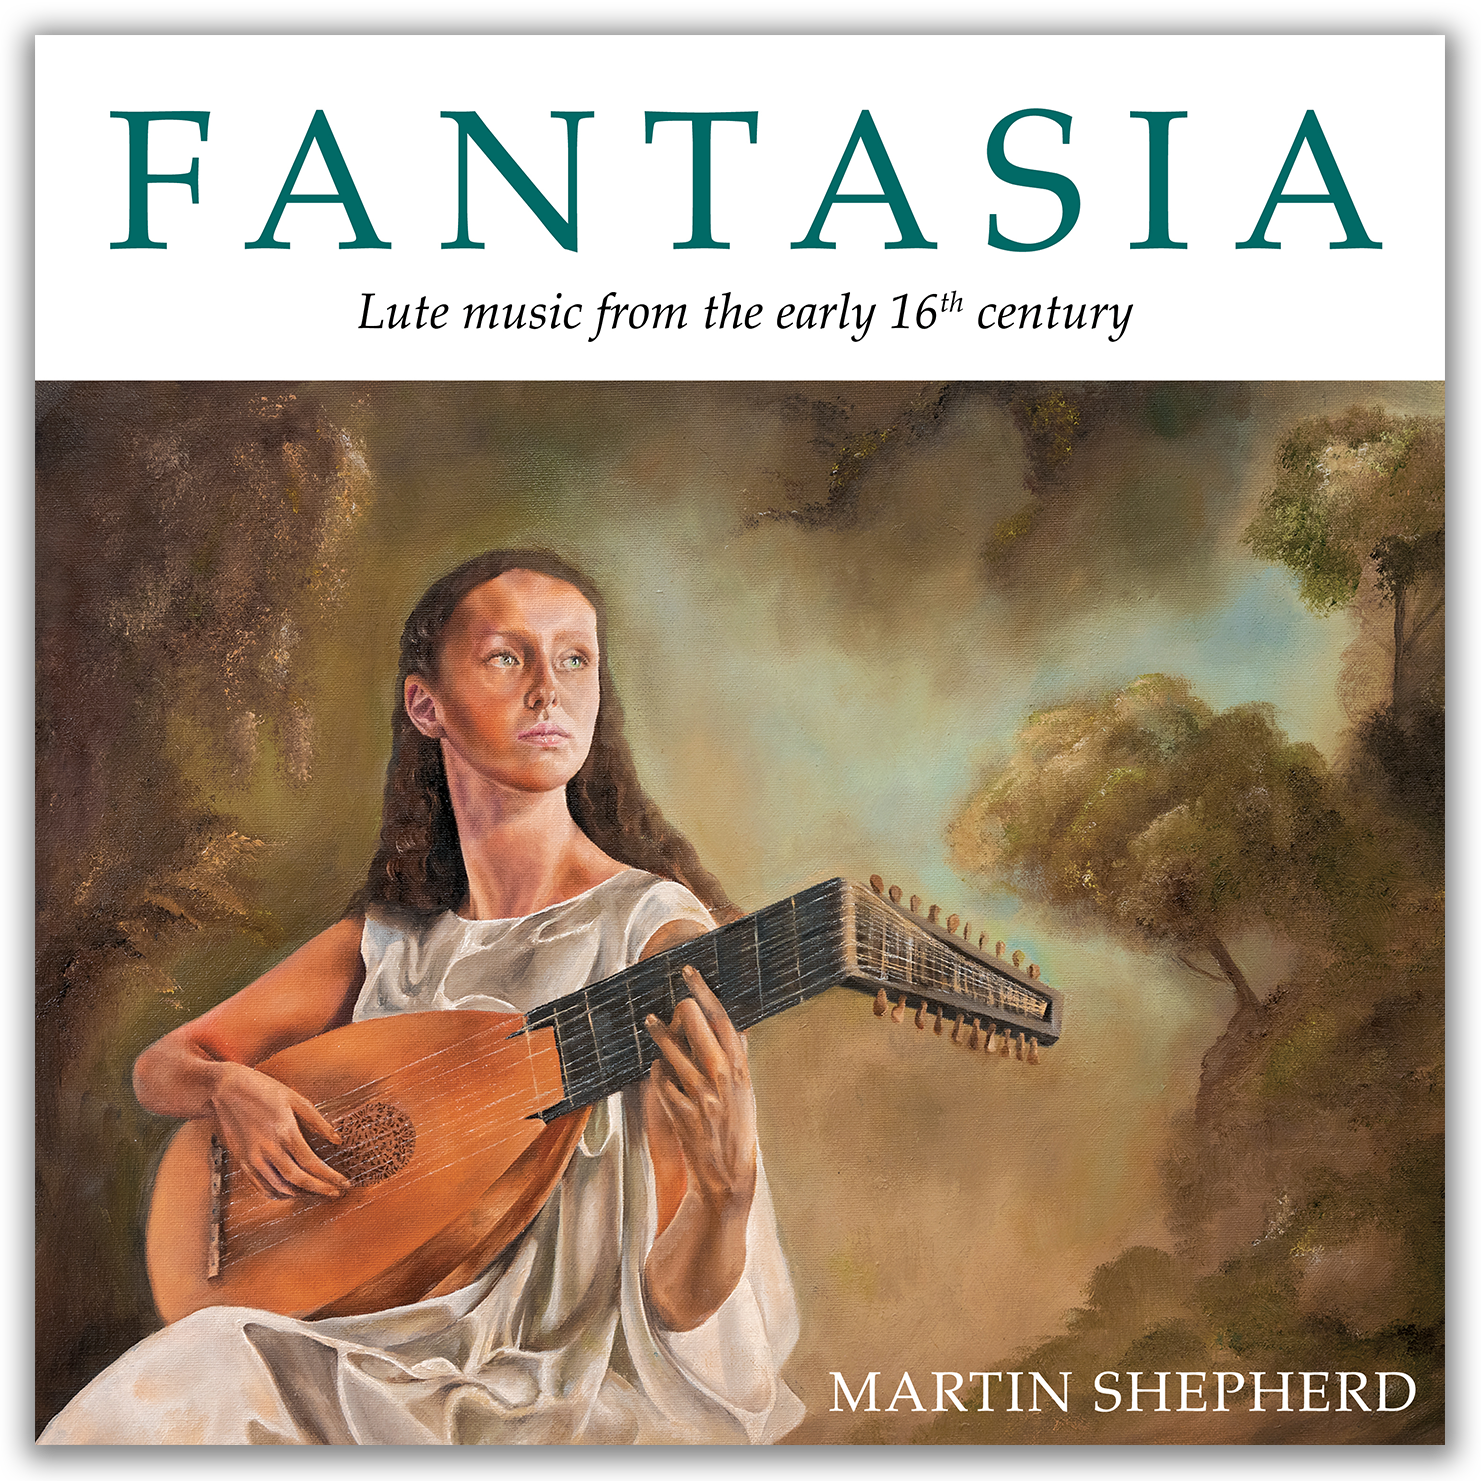 Fantasia: lute music from the early 16th century